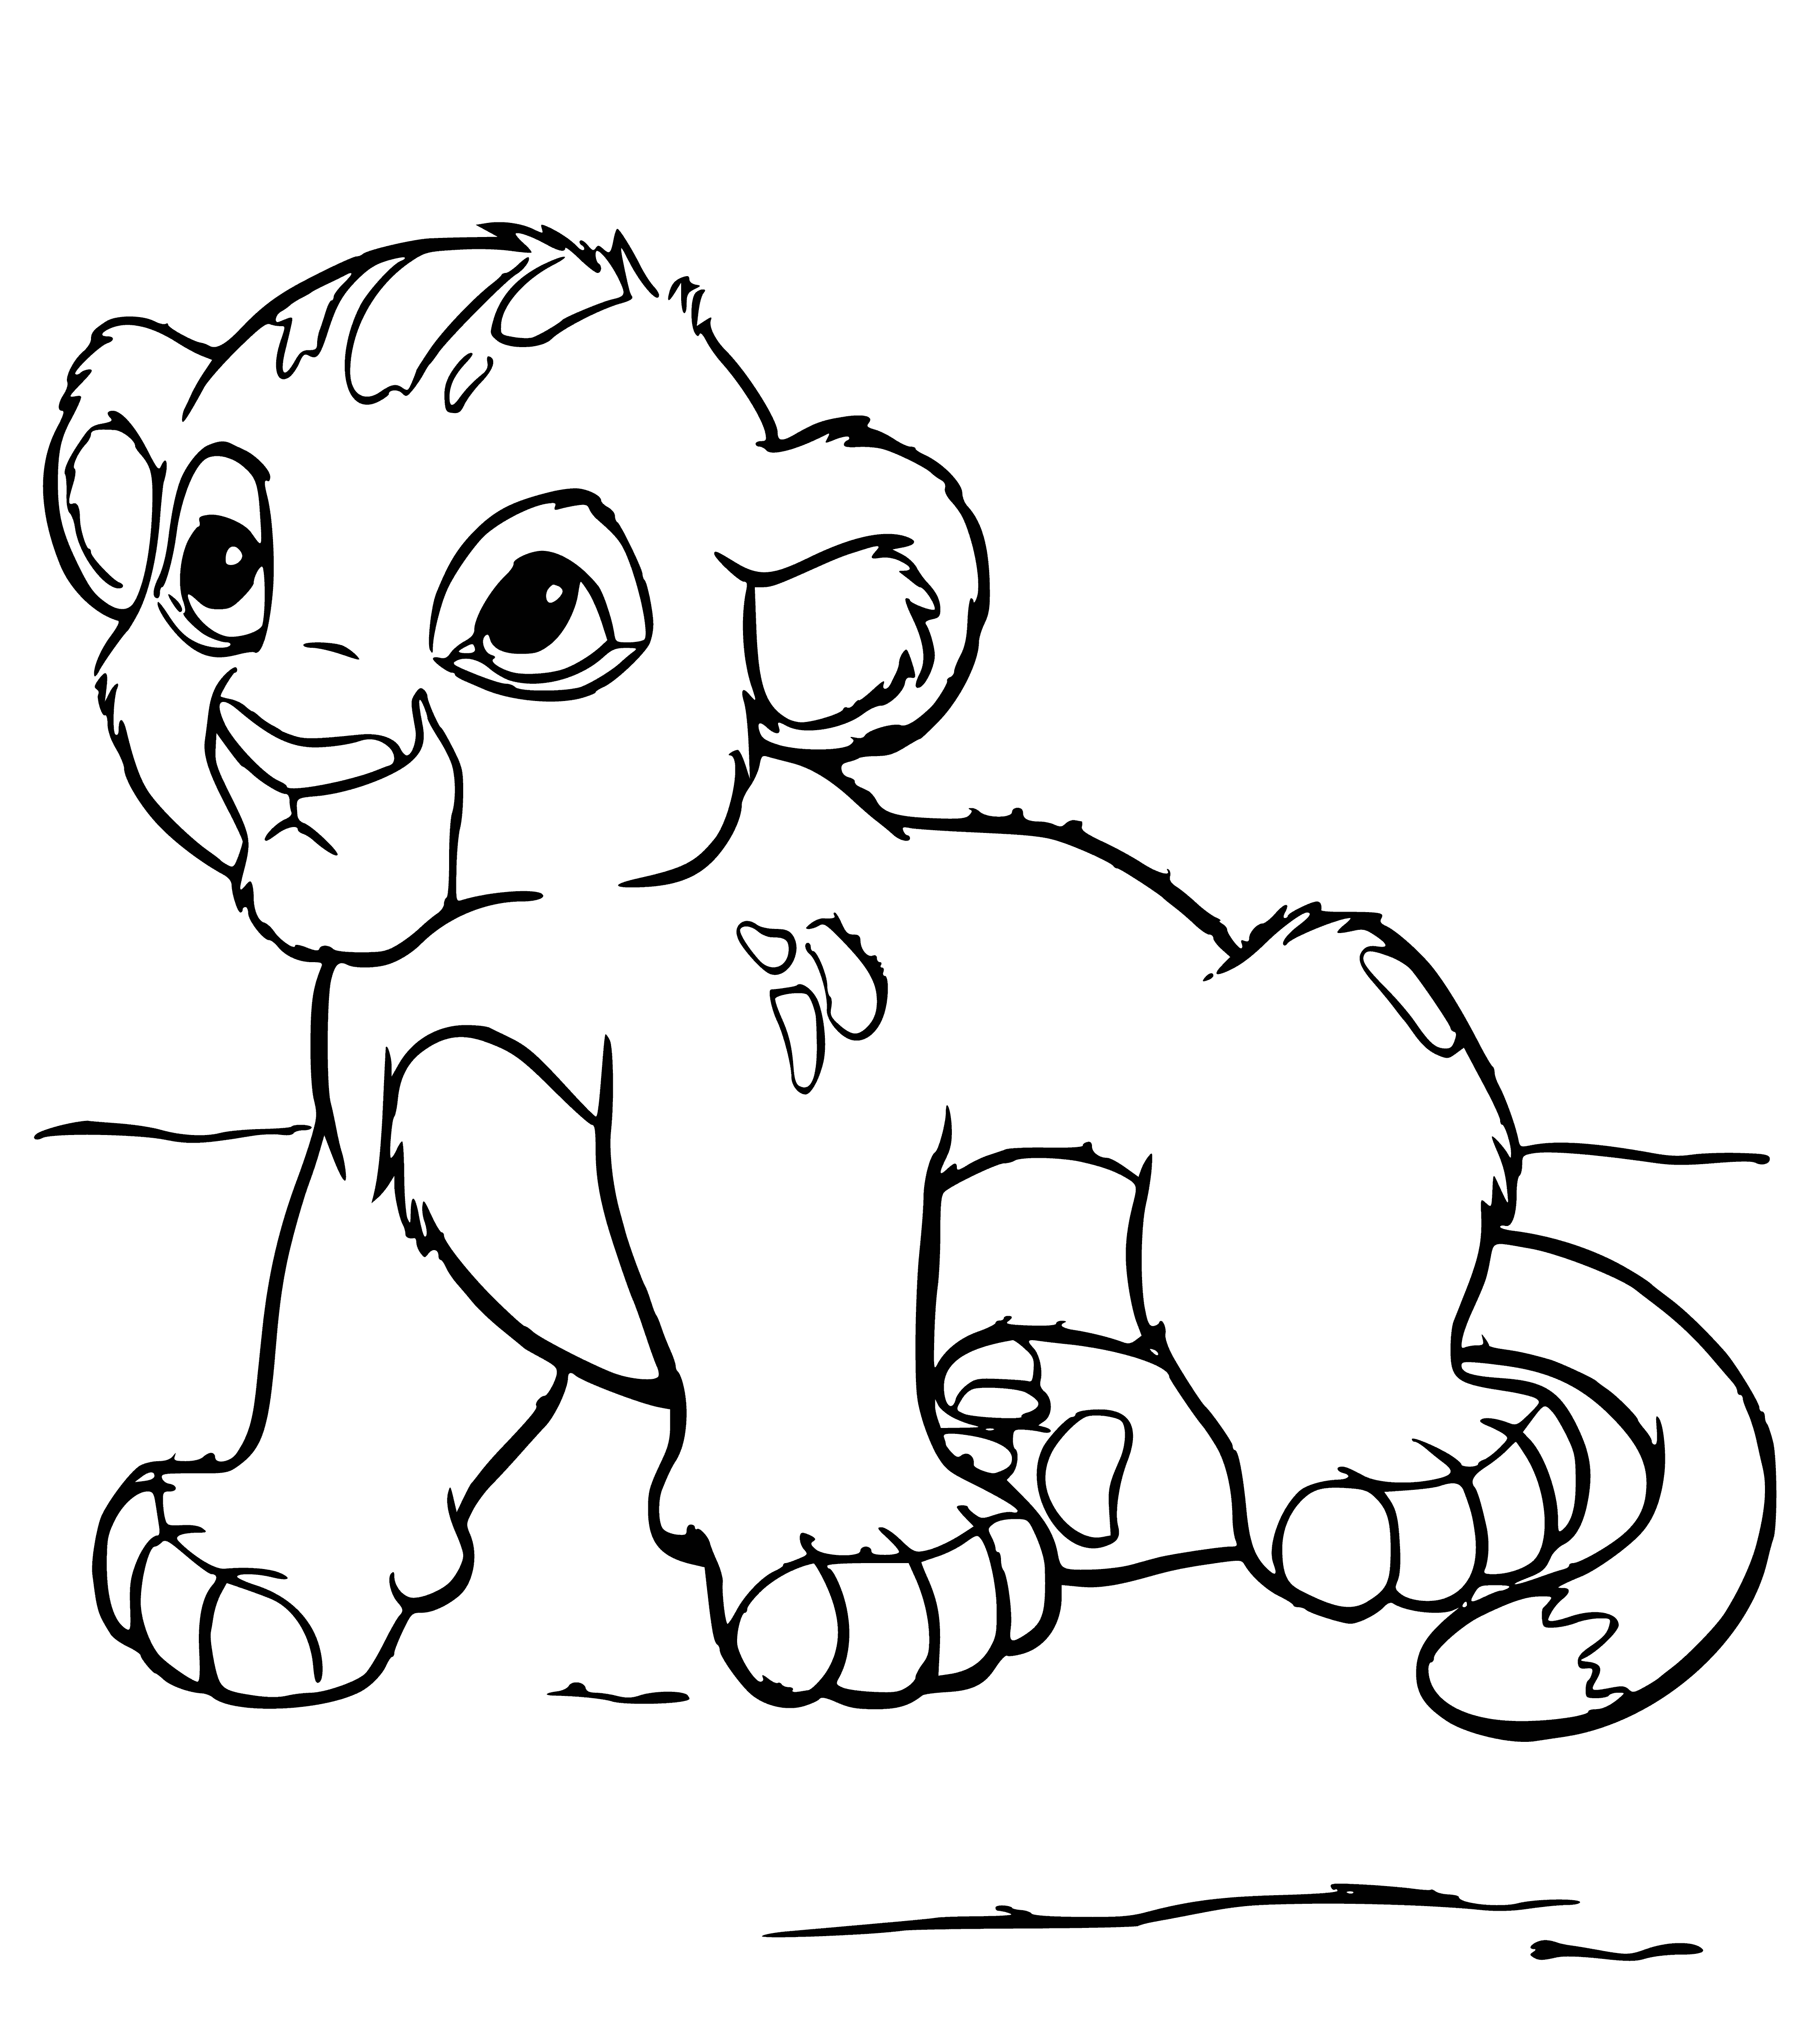 coloring page: Little Simba stands proudly on a rock, surveying his kingdom with wide, bright eyes. His mane is golden and coat reddish brown. #LionKing